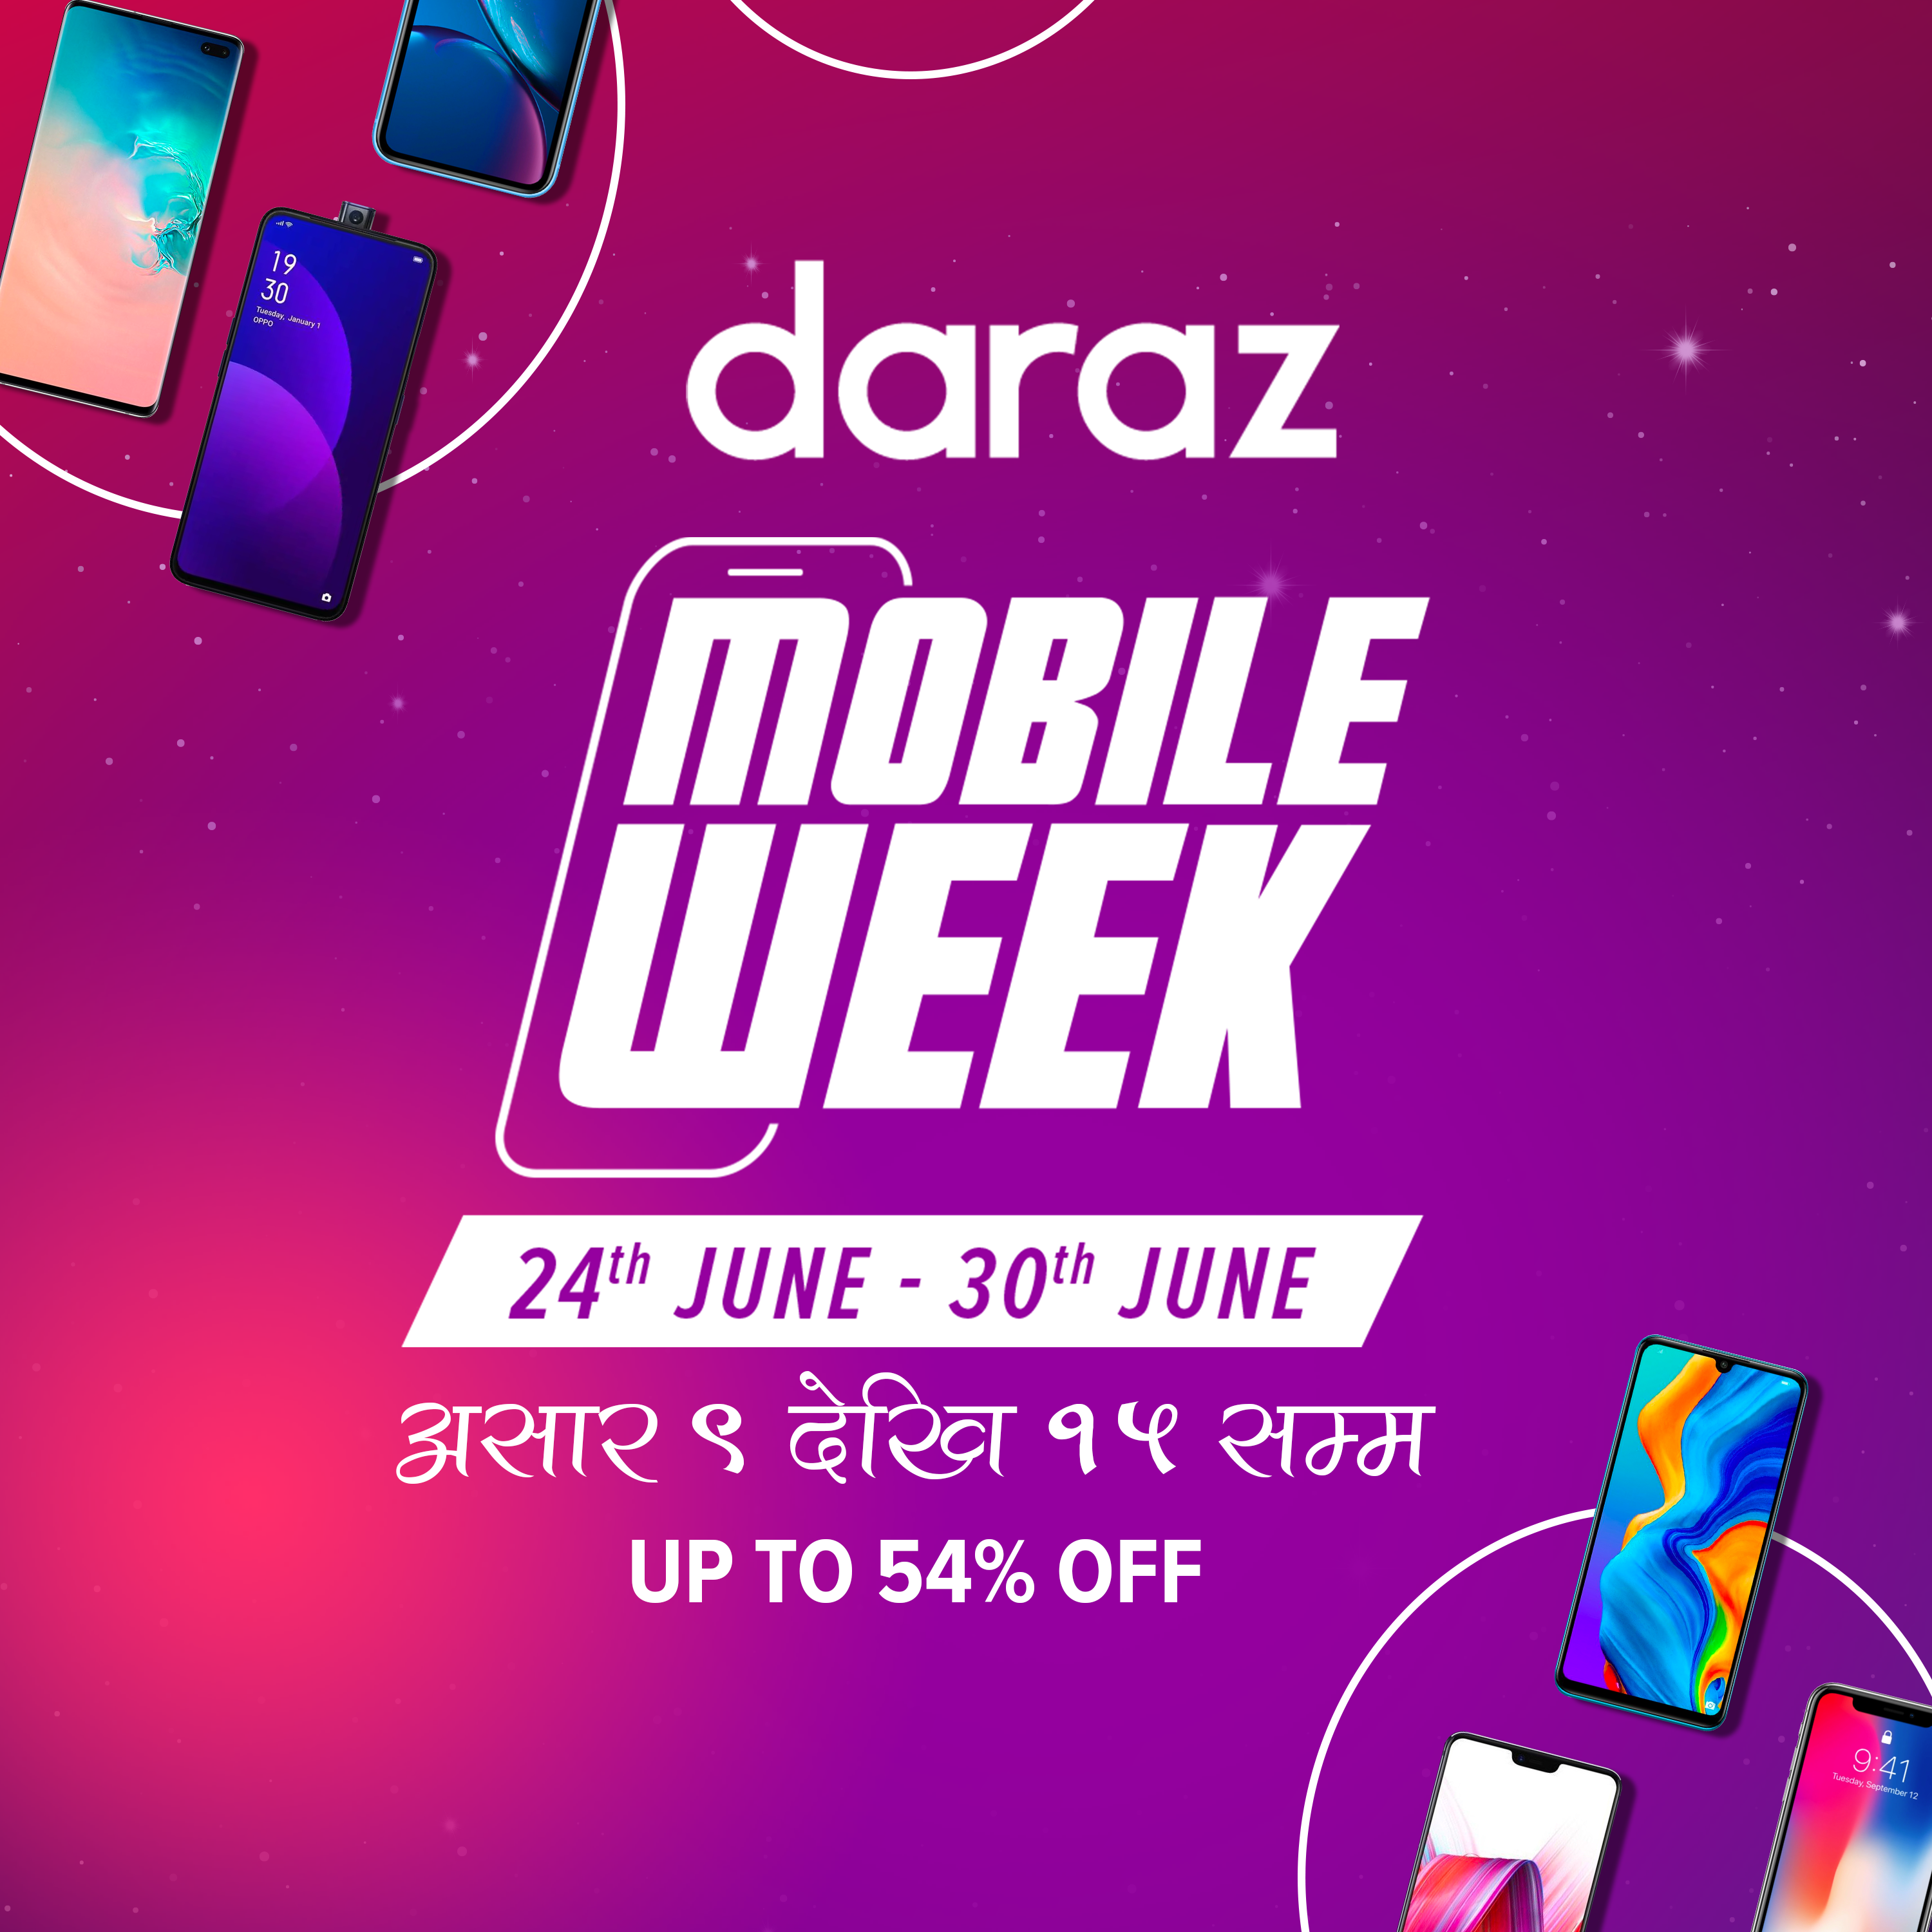 Save Big on Daraz Mobile Week With These Hacks